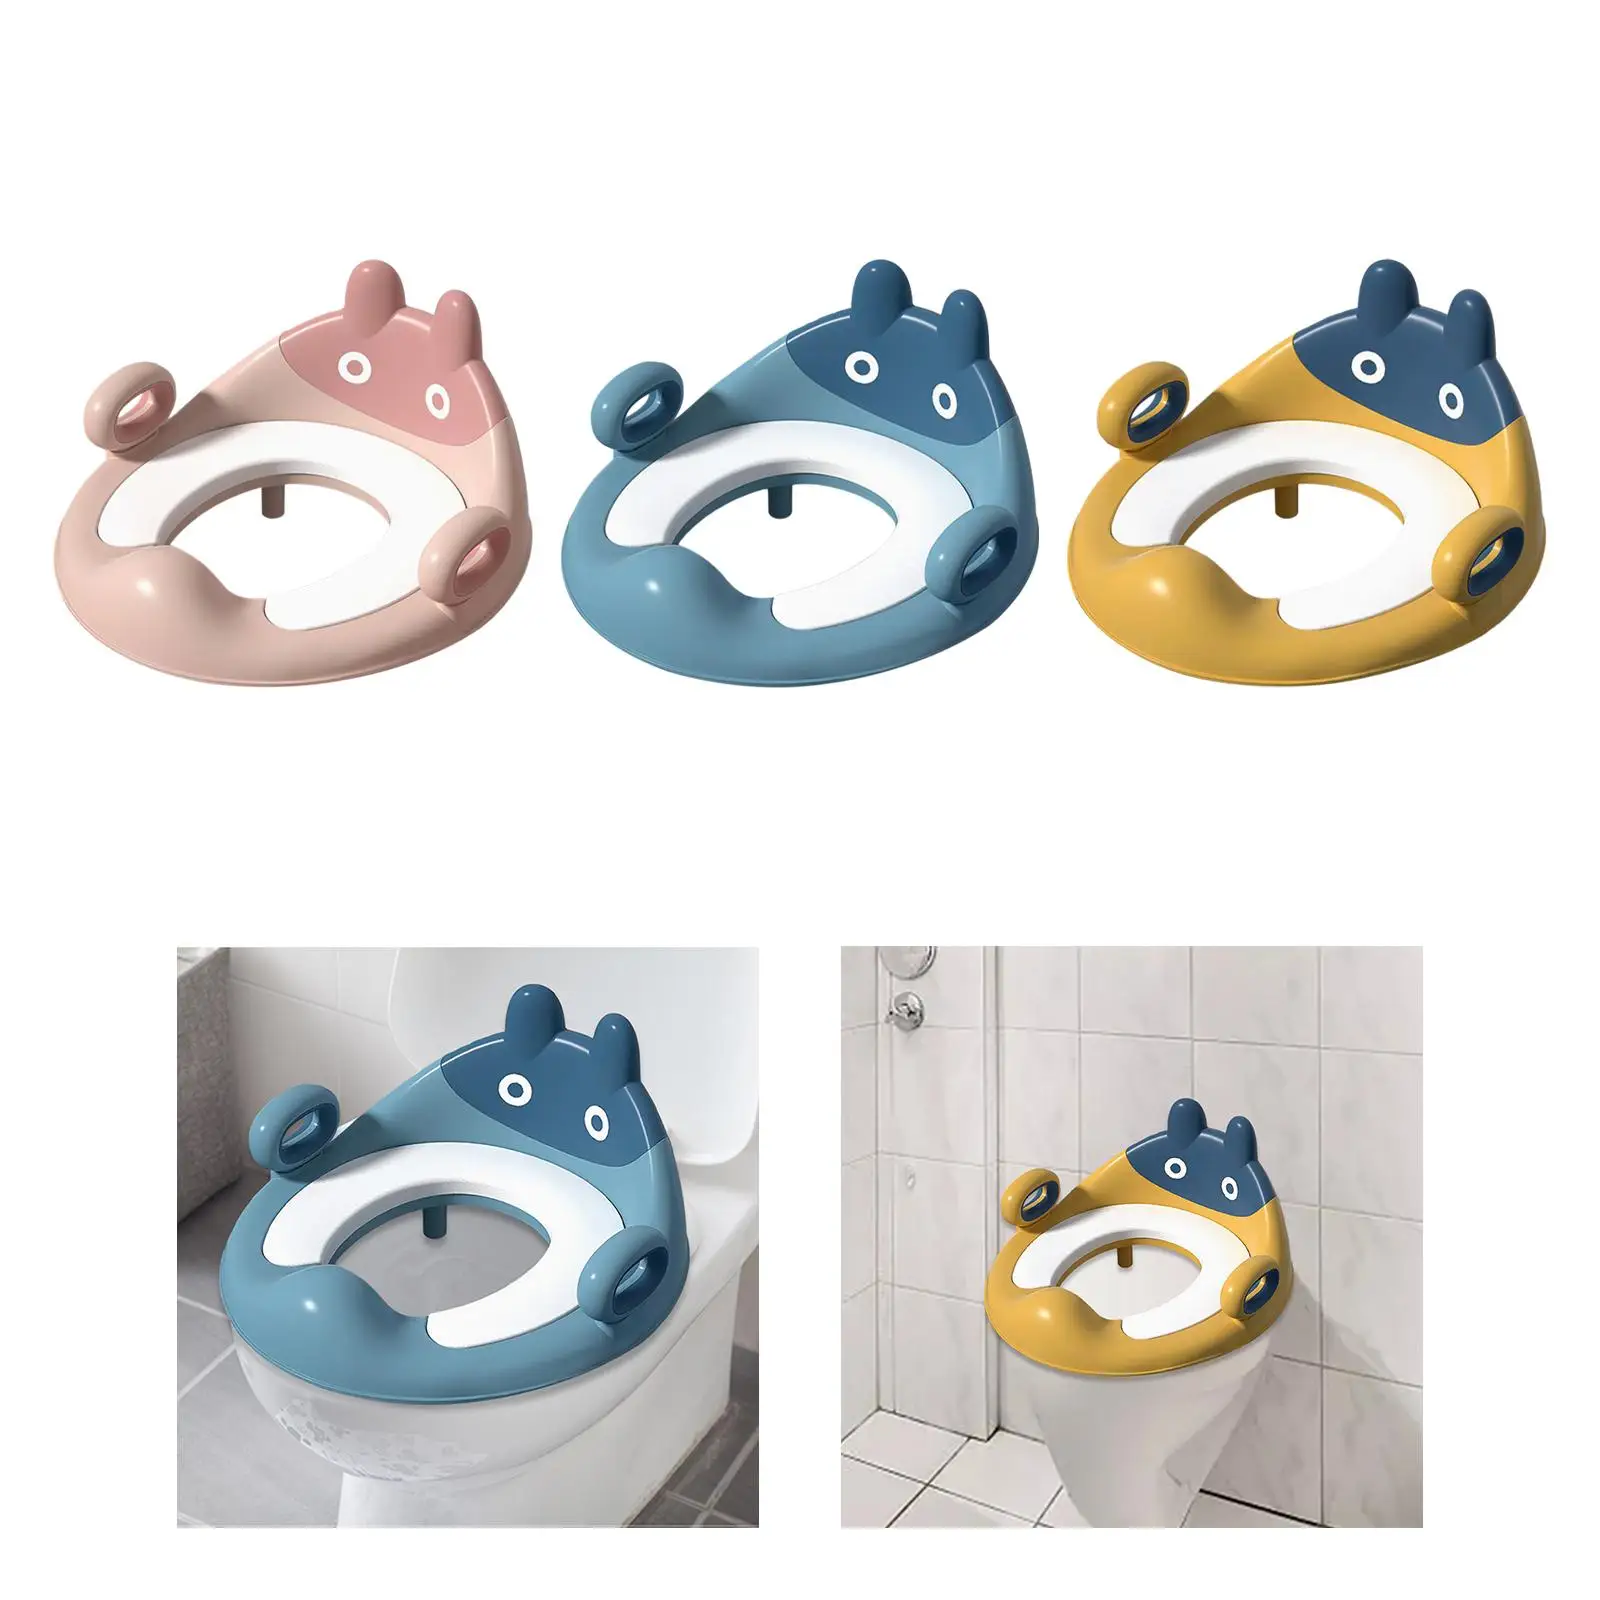 Potty Trainings Seat with Guard with Handles Fits Most Toilets Nonslip Training Toilet for Kids Potty Seat for Kids Girl Child